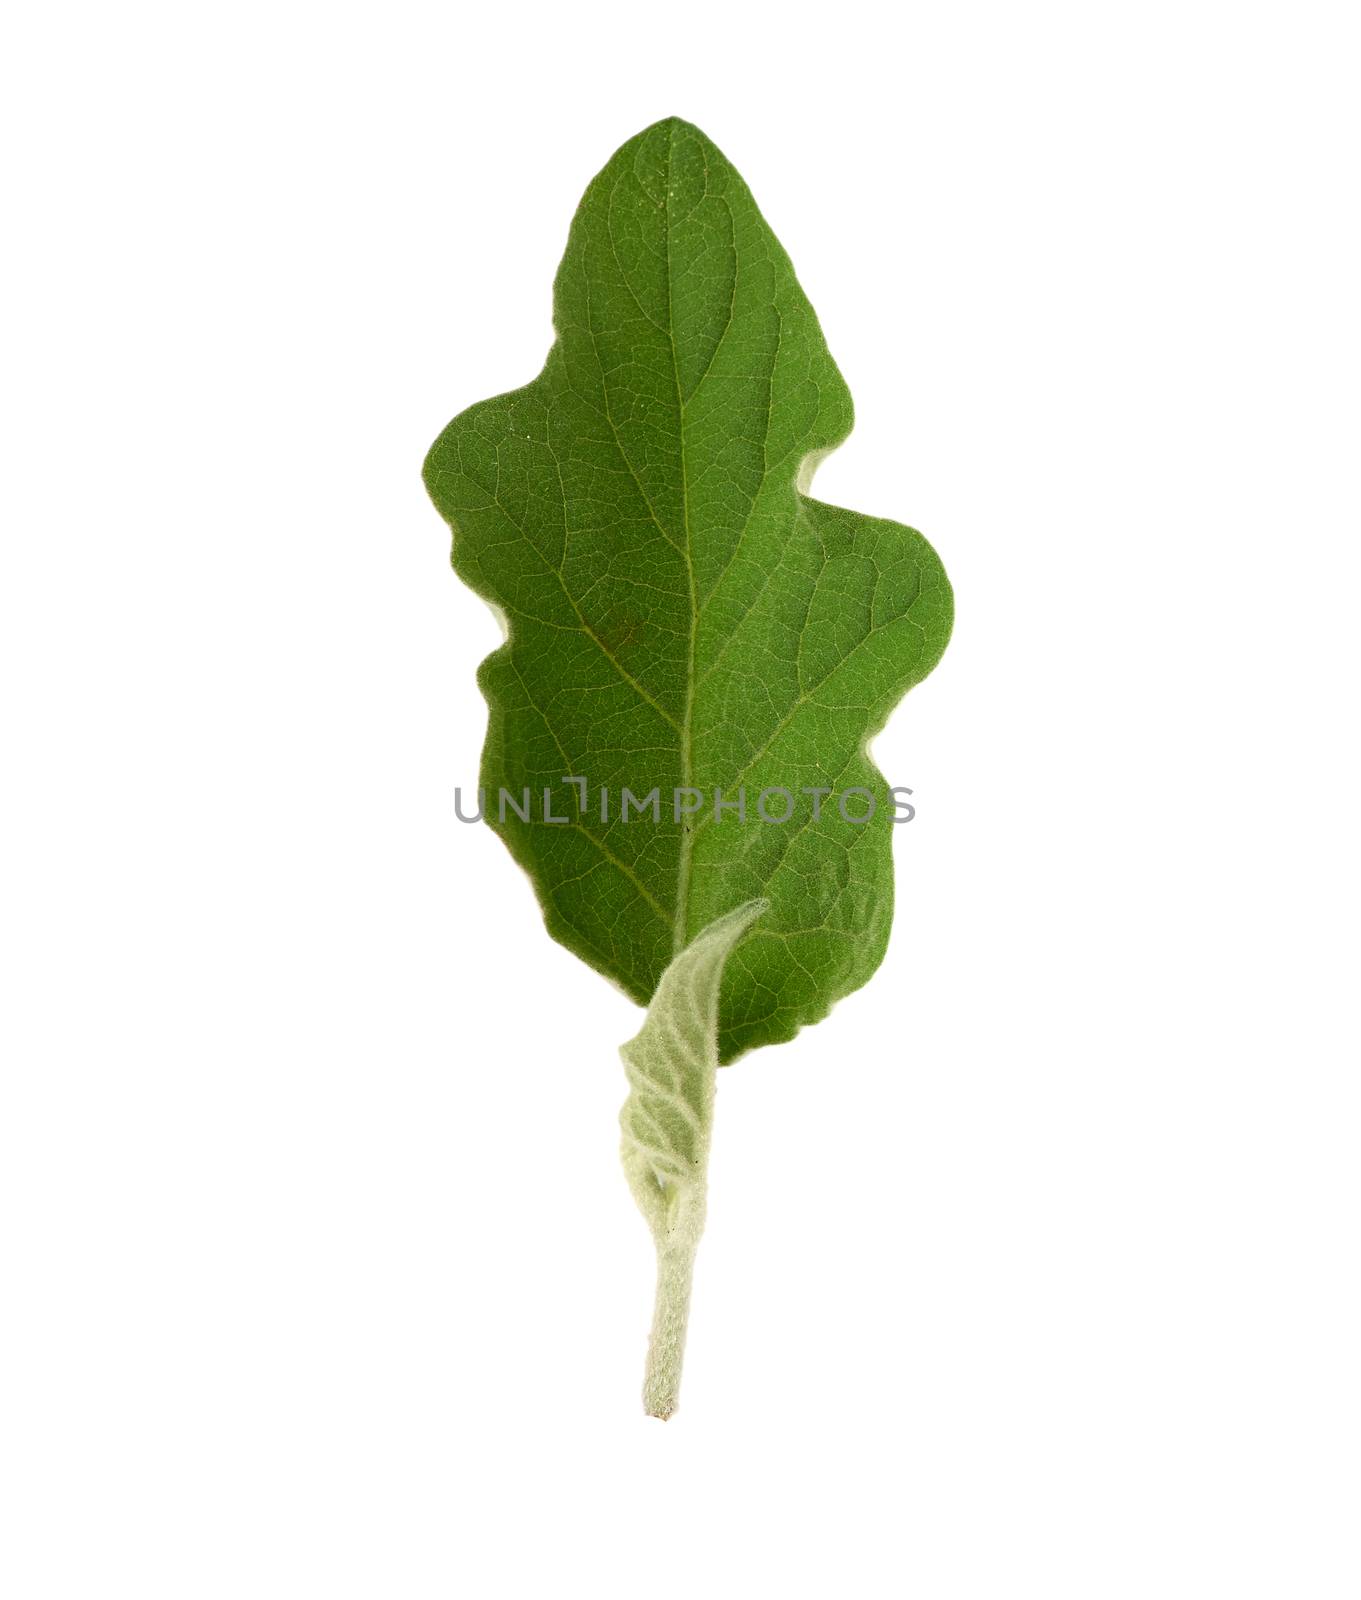 fresh green leaf eggplant isolated on a white background, close up